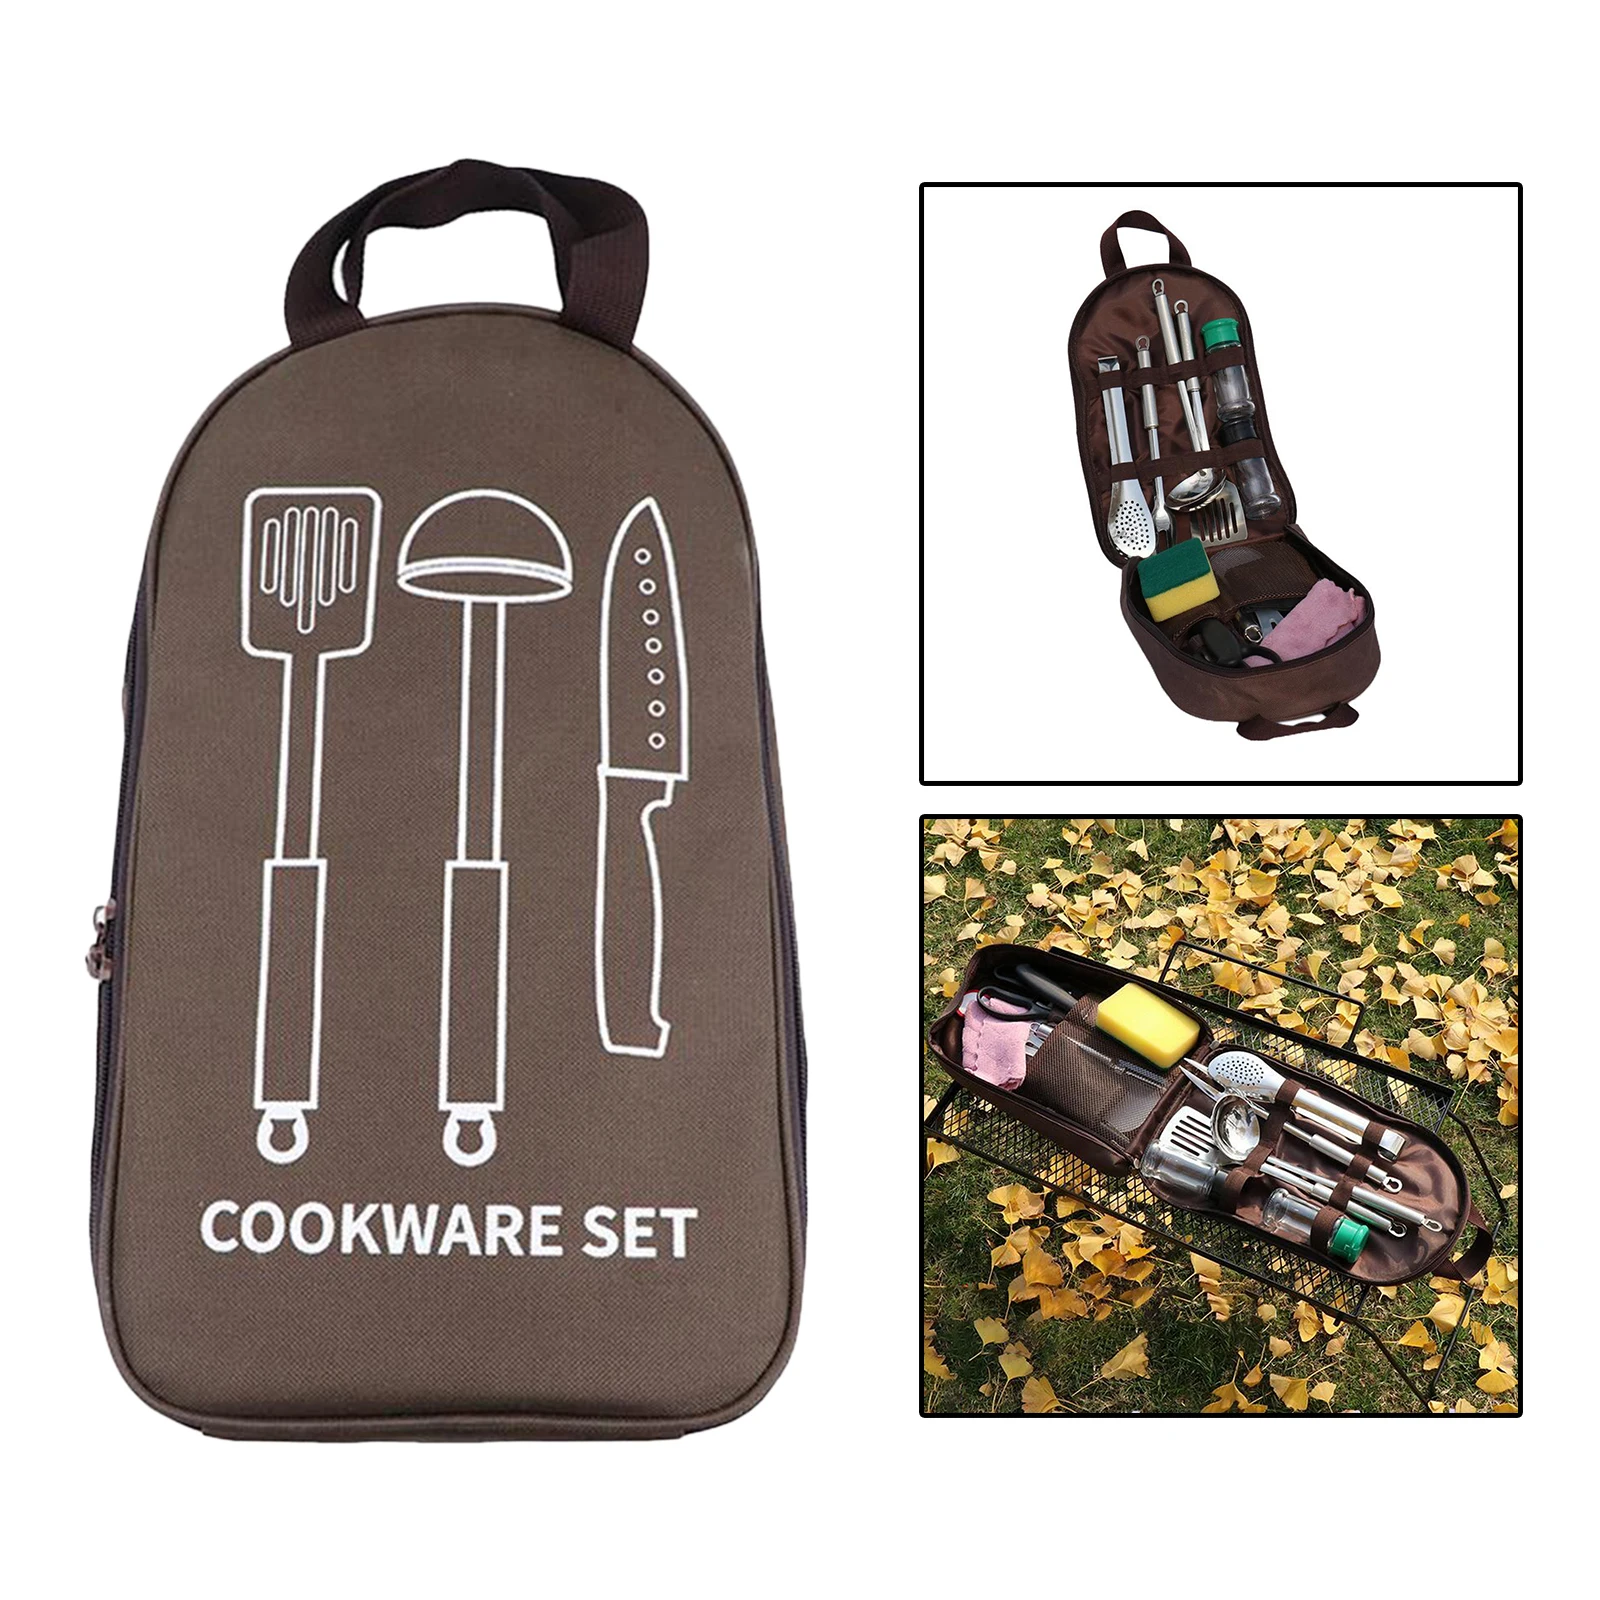 Camping Utensils Organizer Carry Bag Outdoor Cooking Camp Picnic 18-Piece Travel Cookware Set Compact Portable Bag Storage Pouch